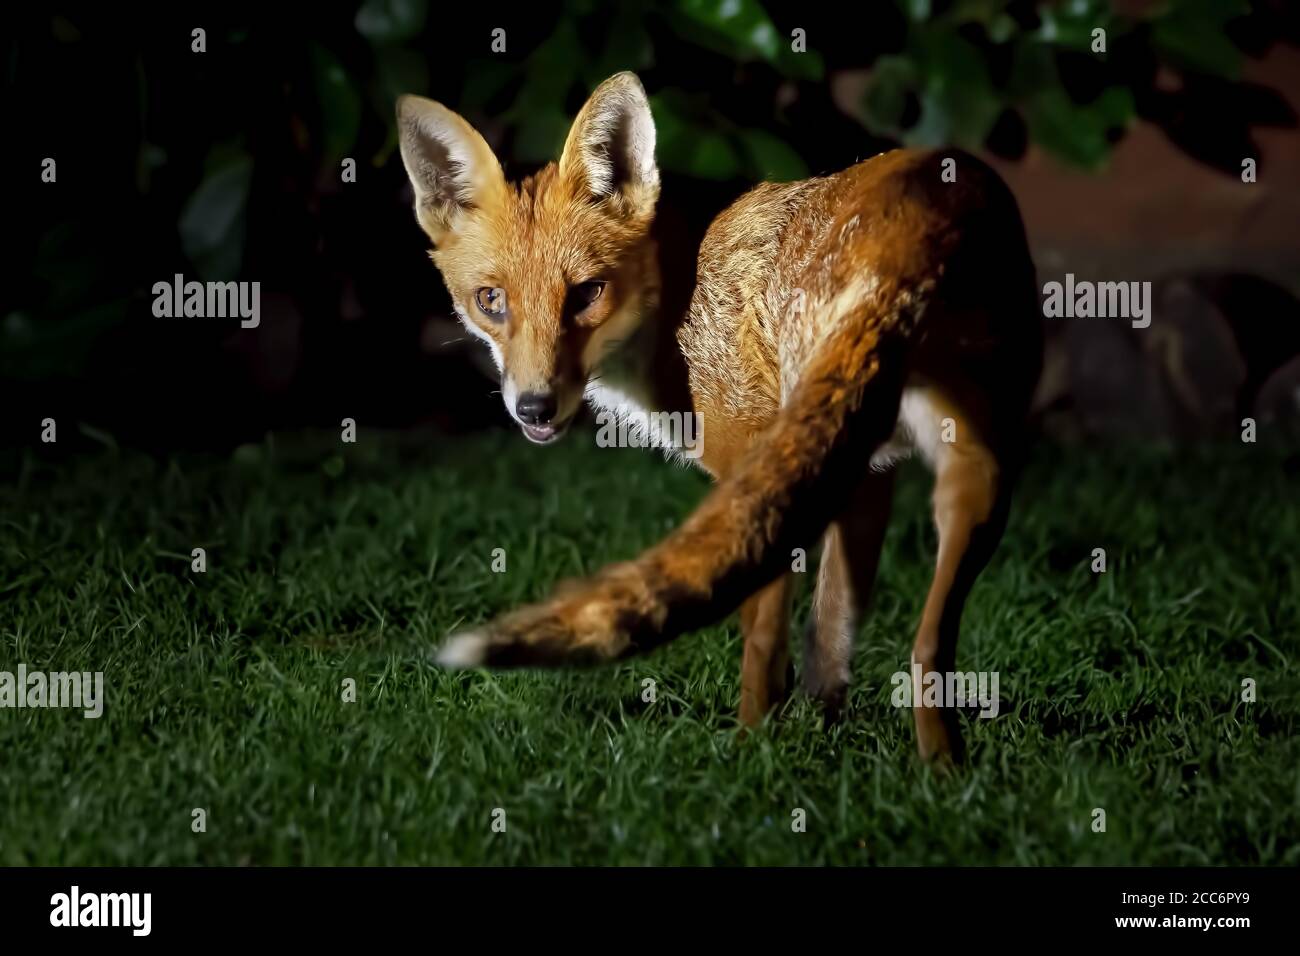 Red fox visiting a garden for food Stock Photo